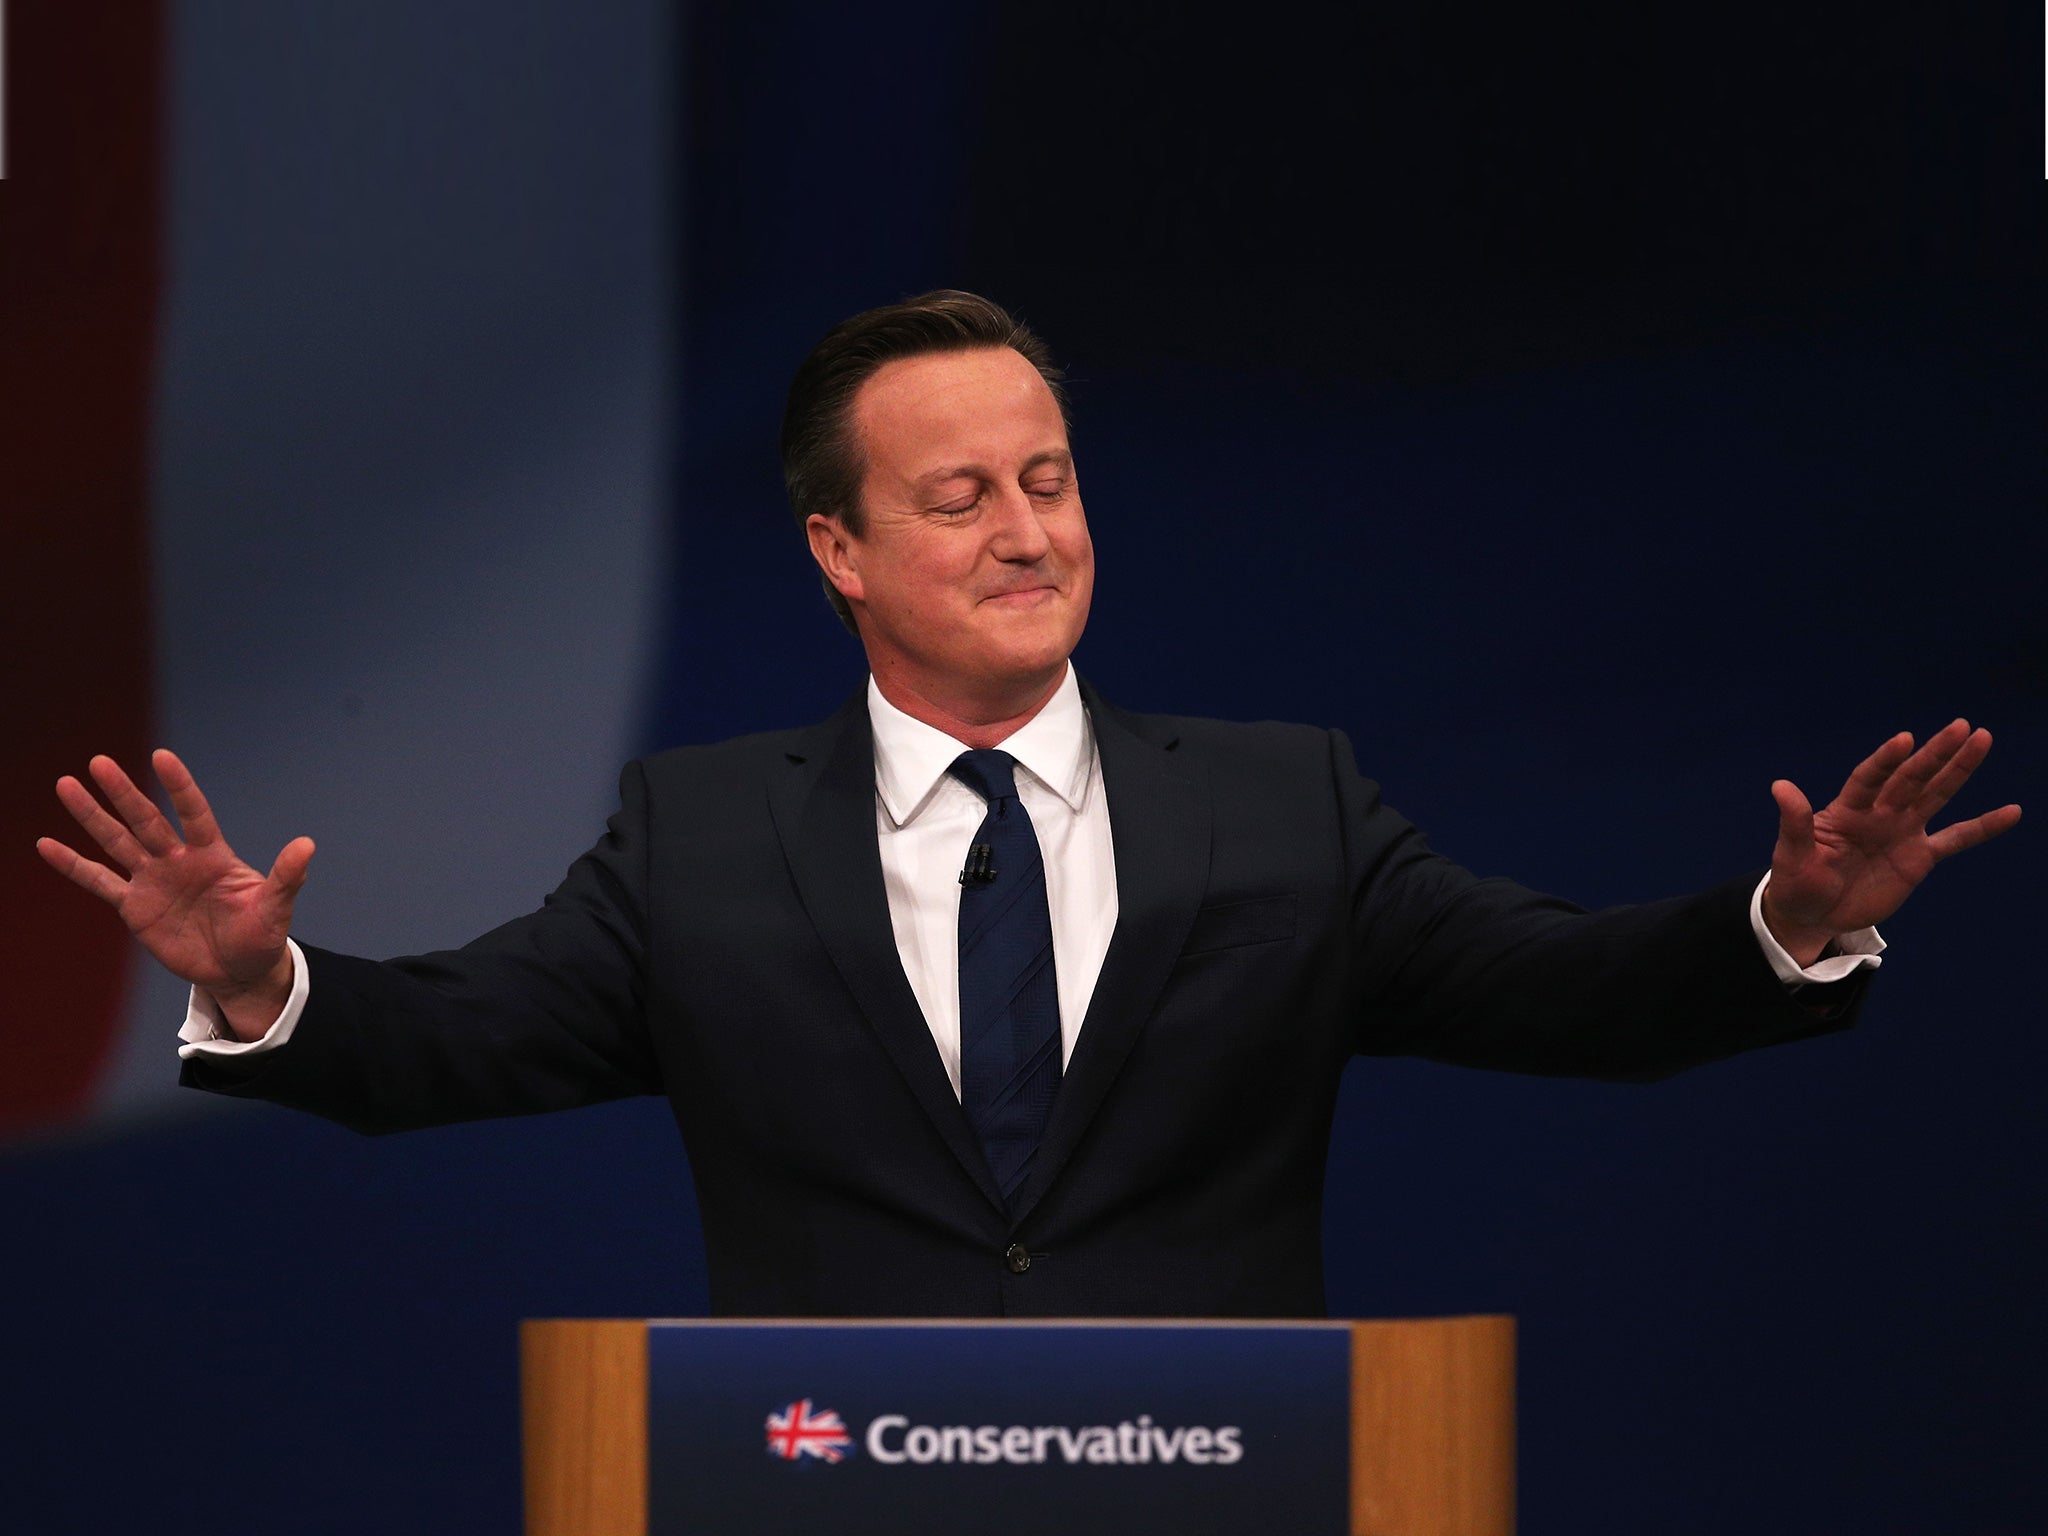 Cameron gives his keynote speech at the Conservative Party Conference